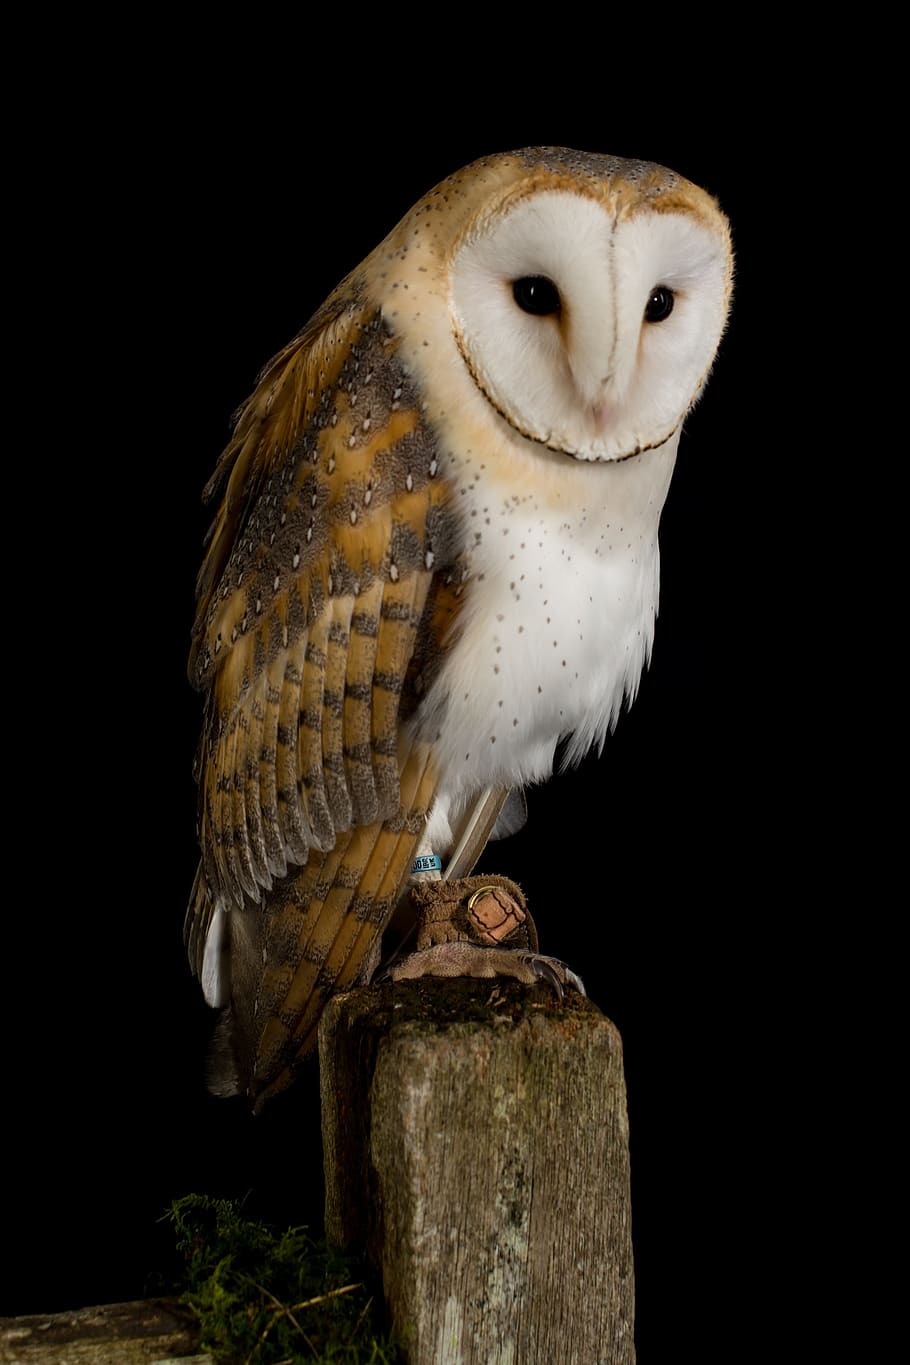 owl, bird, animal, nature, feather, portrait, wildlife, feathers, nocturnal, perched